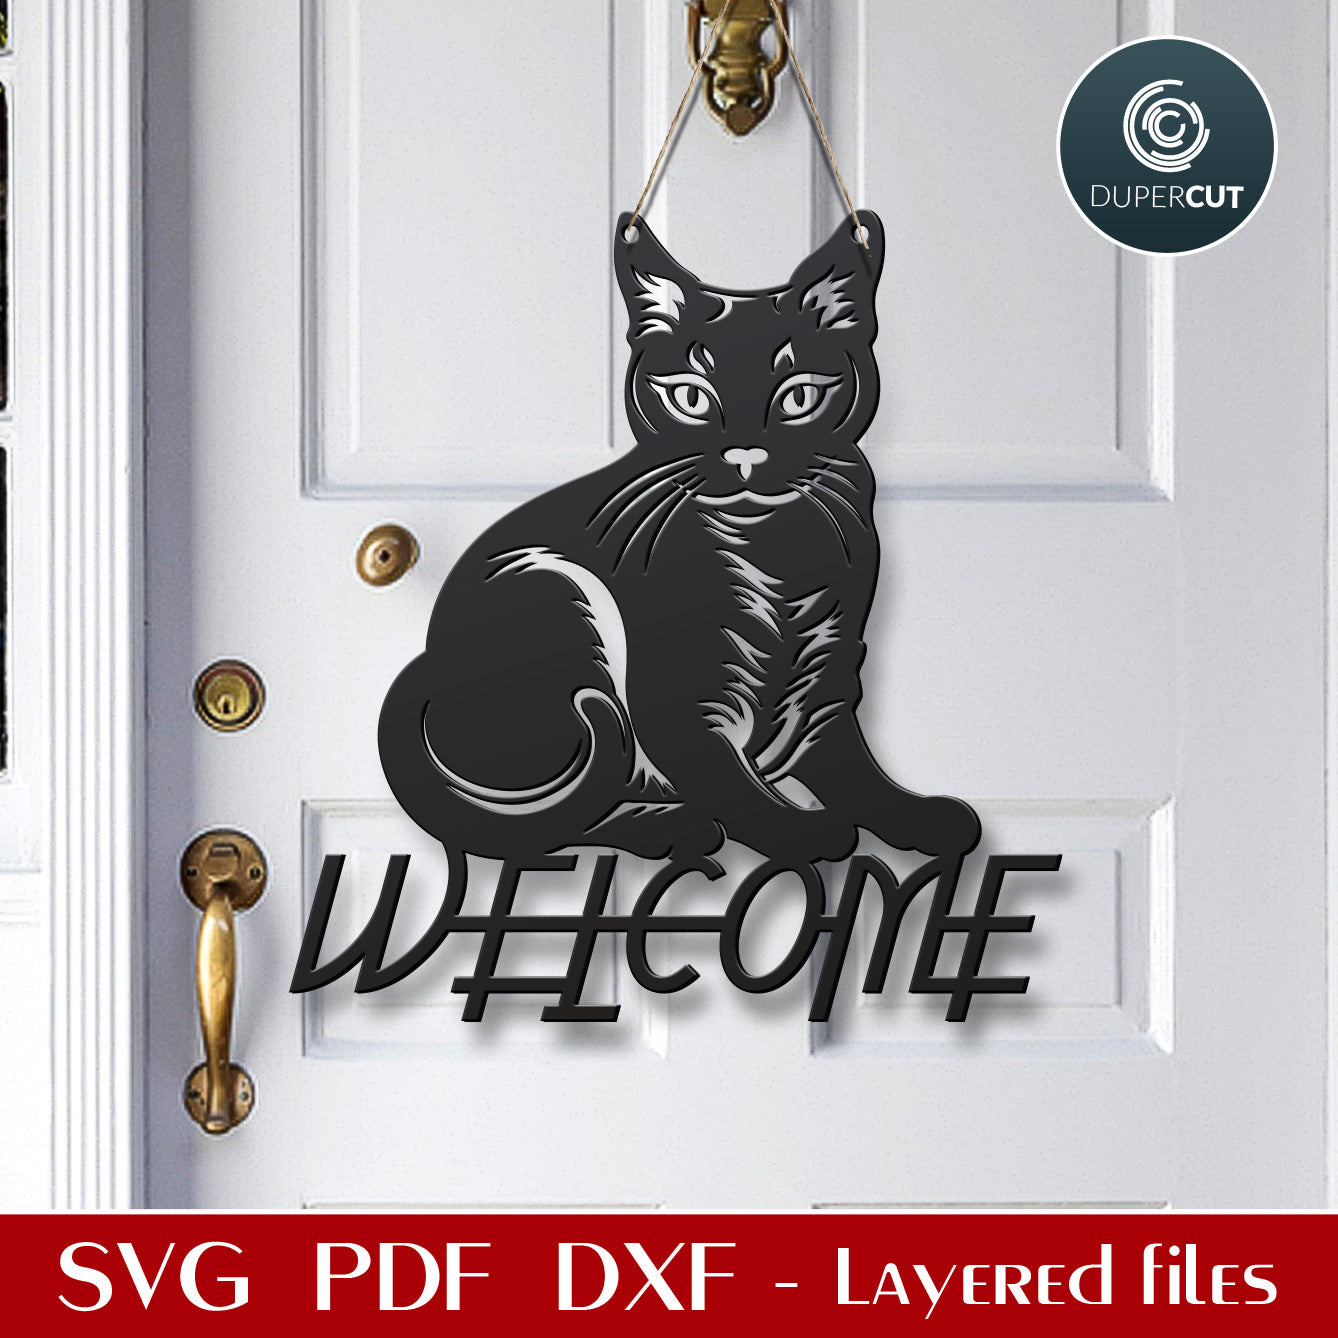 Cat welcome sign door hanger - SVG DXF vector files for Glowforge, Cricut, Silhouette cameo, CNC plasma machines by www.DuperCut.com